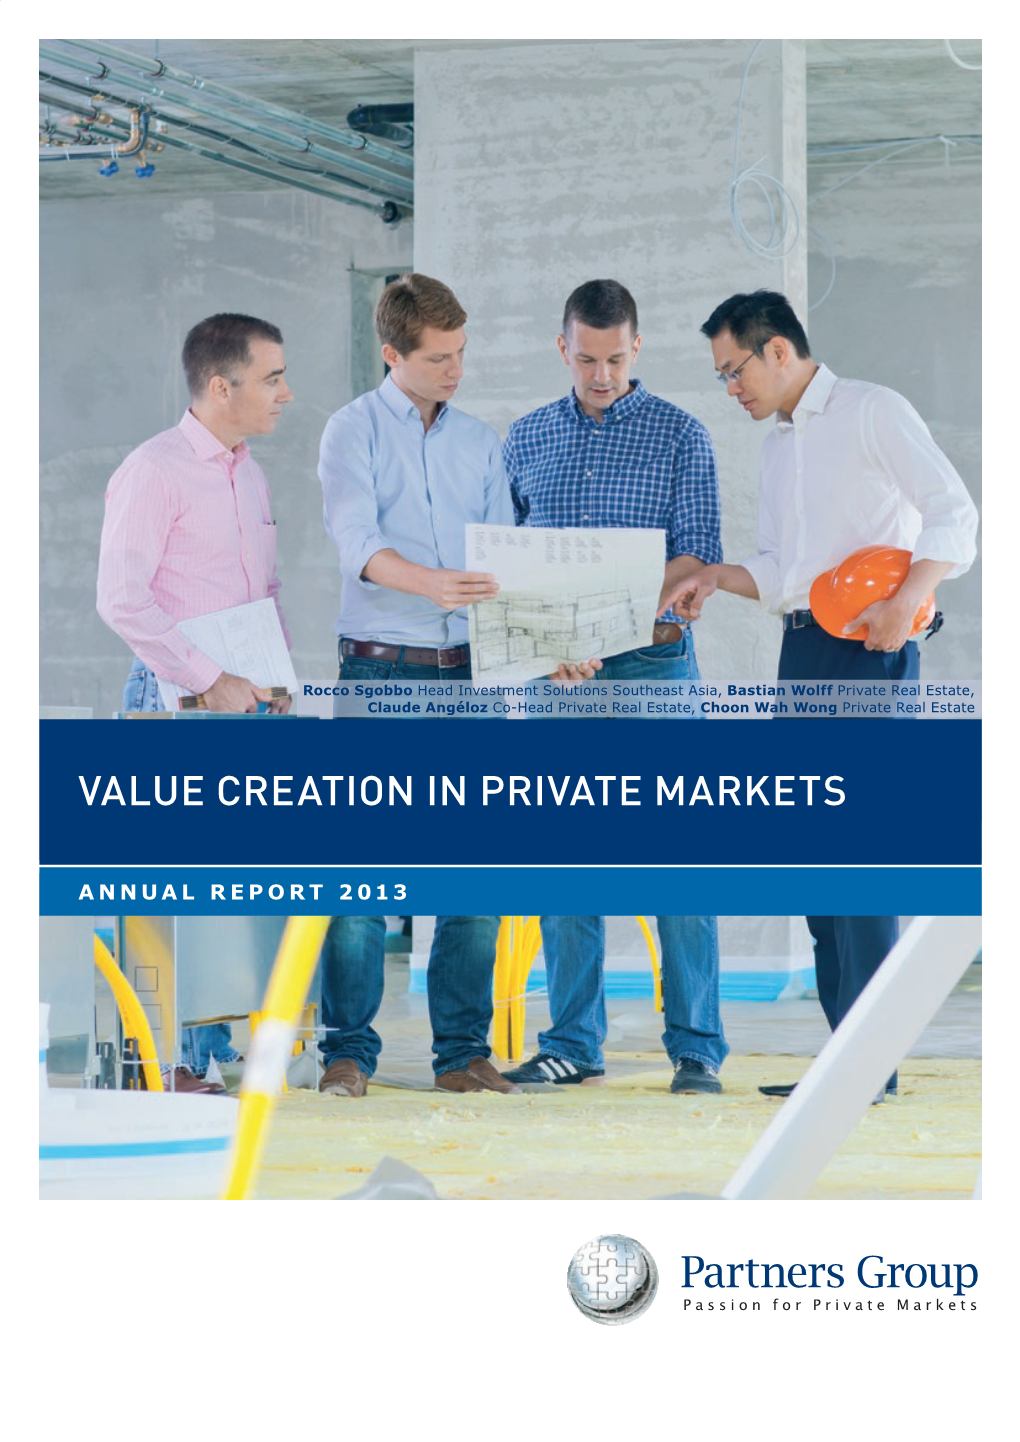 Value Creation in Private Markets Assessing Underlying Companies Annual Report 2013 in a Secondary Transaction